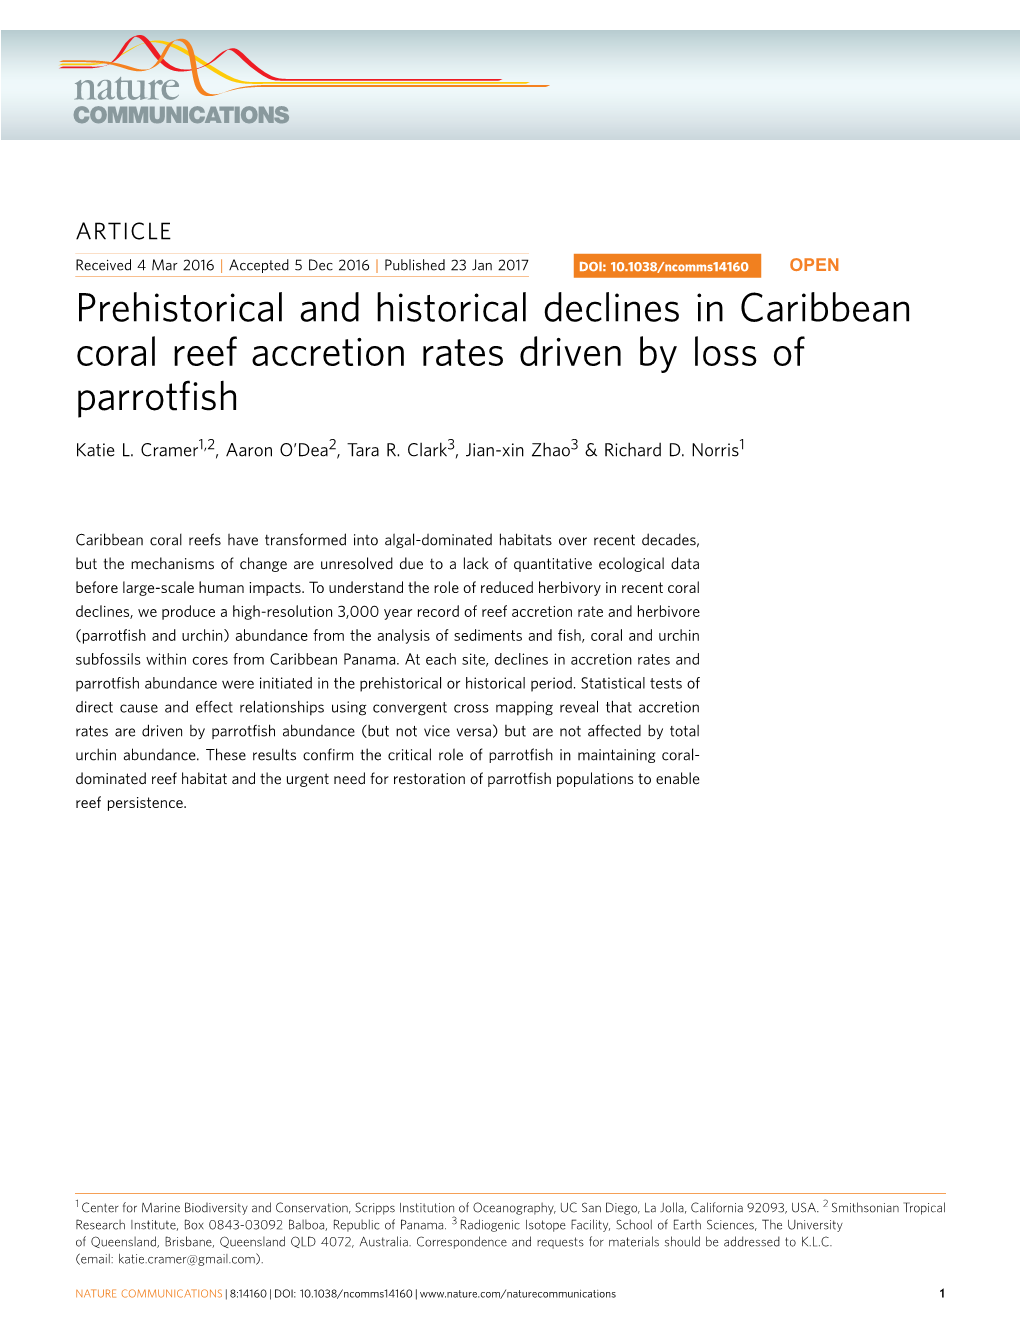 Prehistorical and Historical Declines in Caribbean Coral Reef Accretion Rates Driven by Loss of Parrotfish